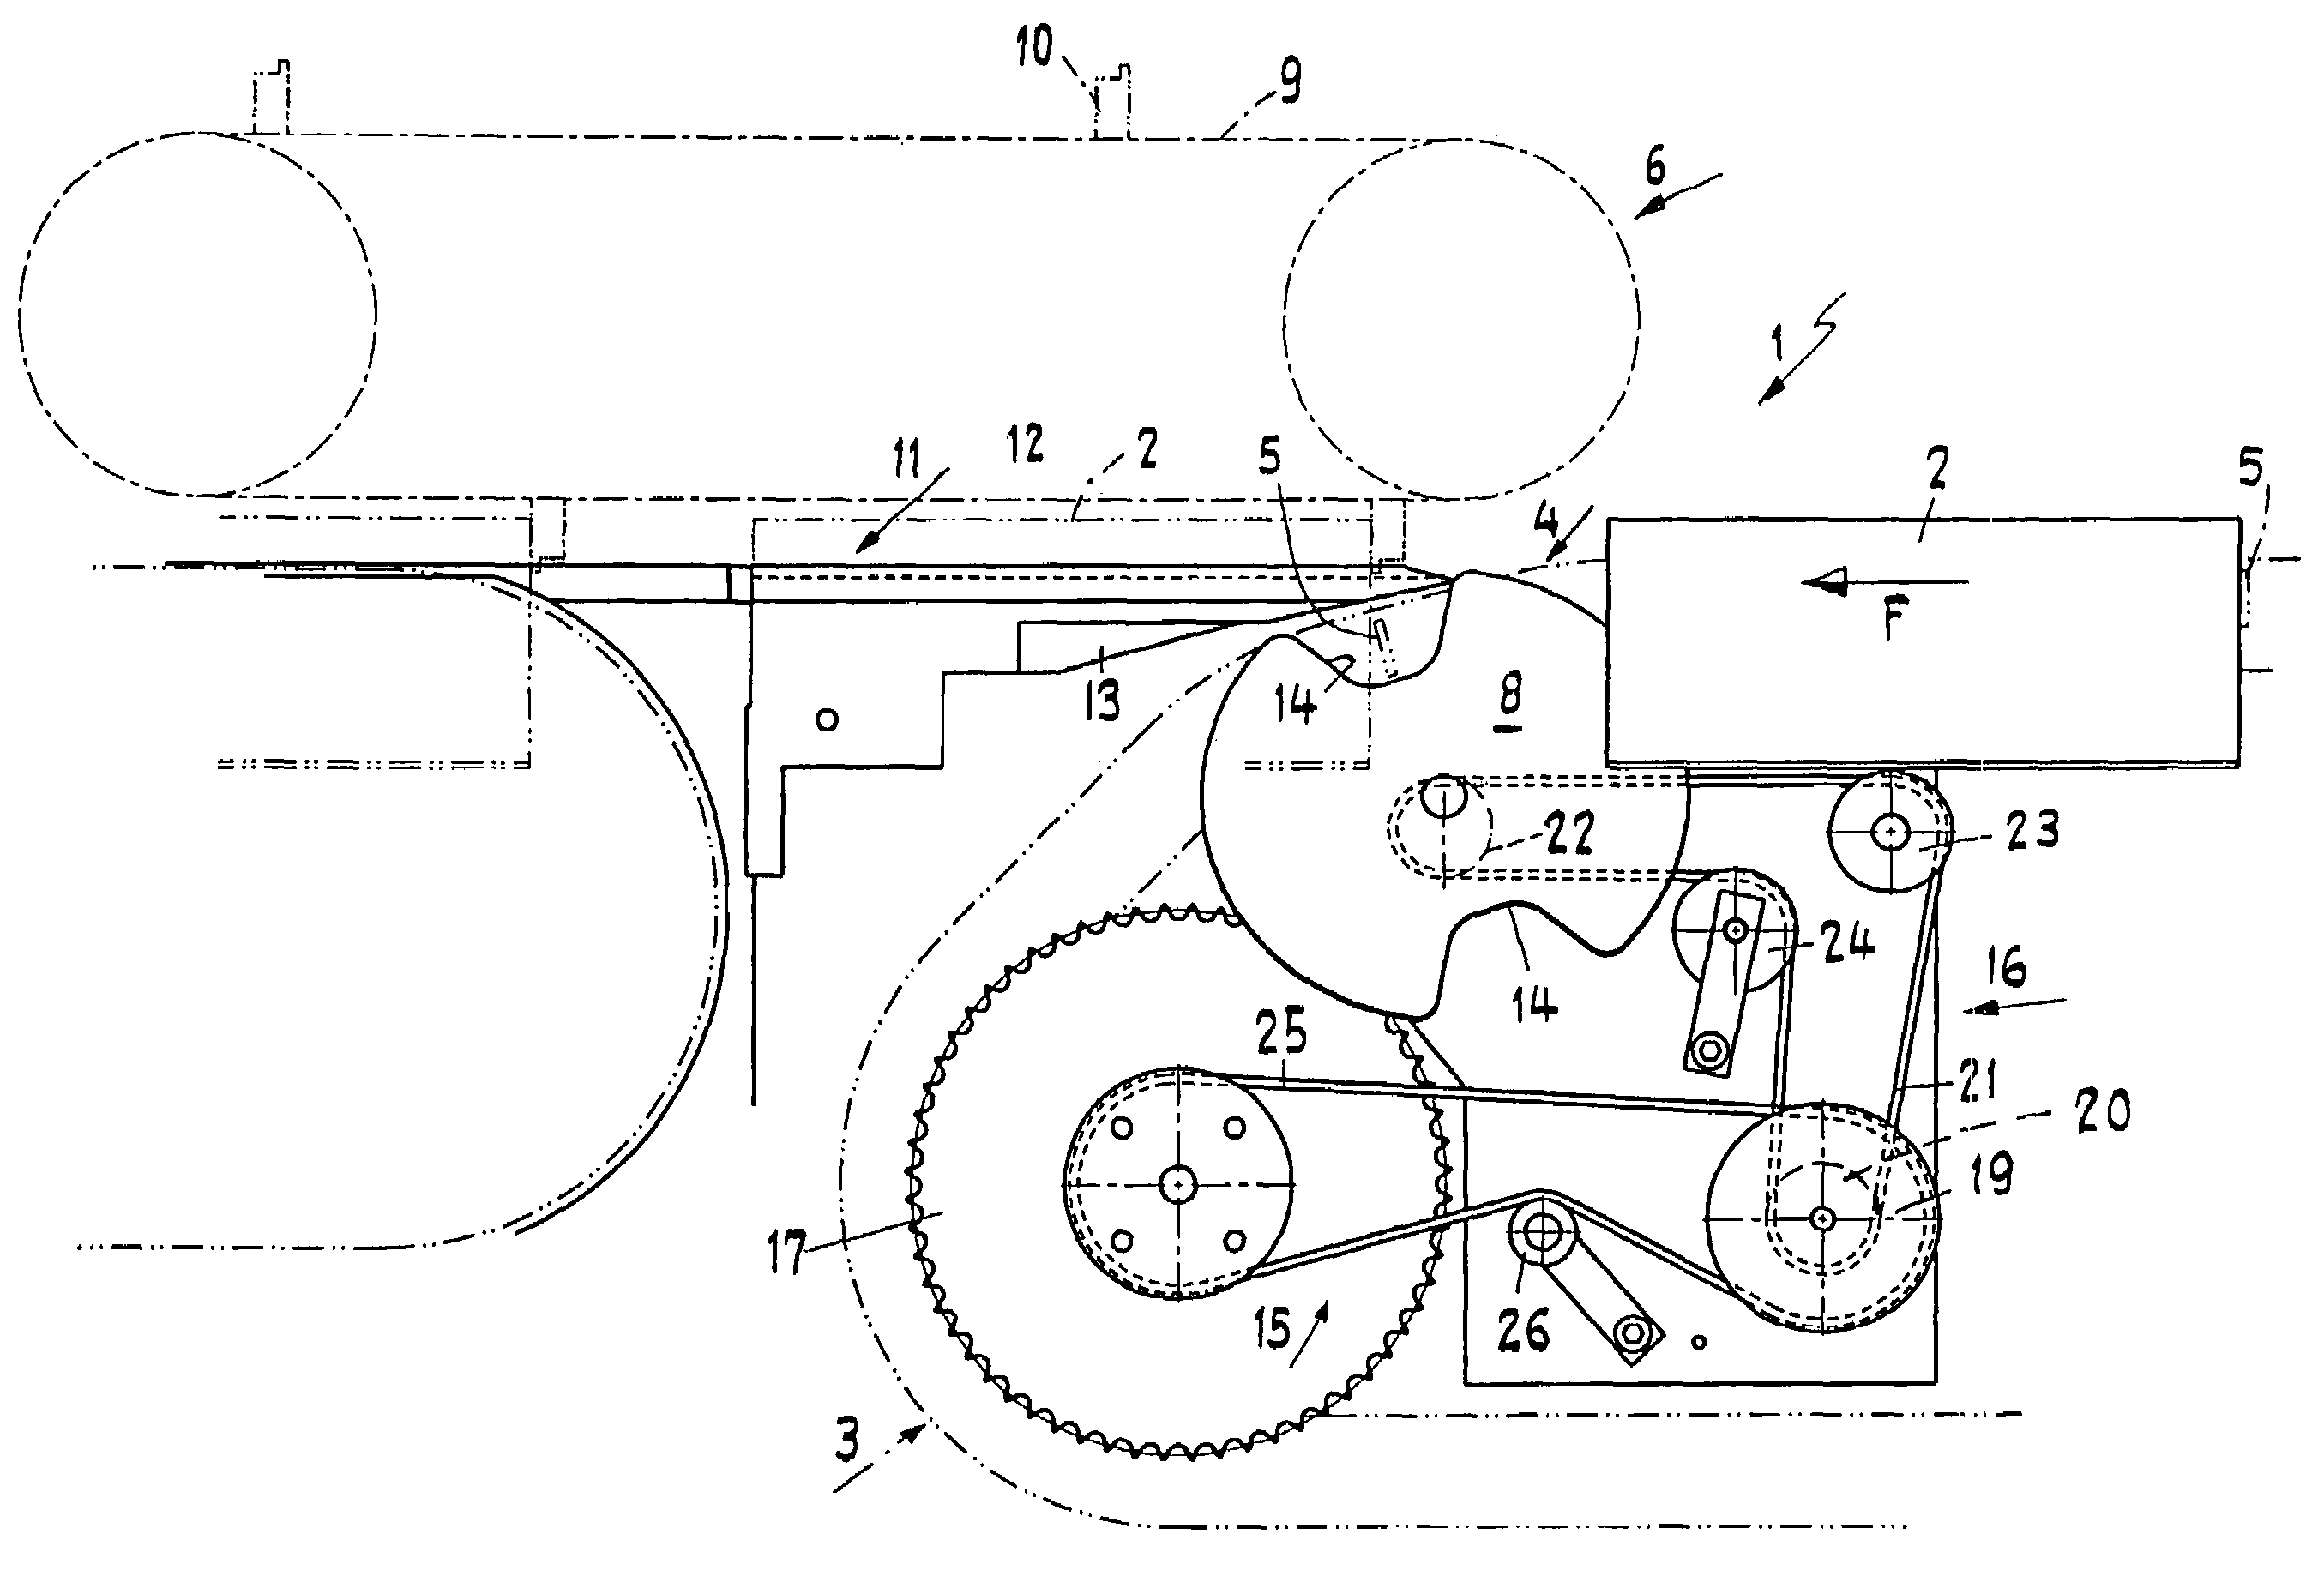 Apparatus for producing a bound print item